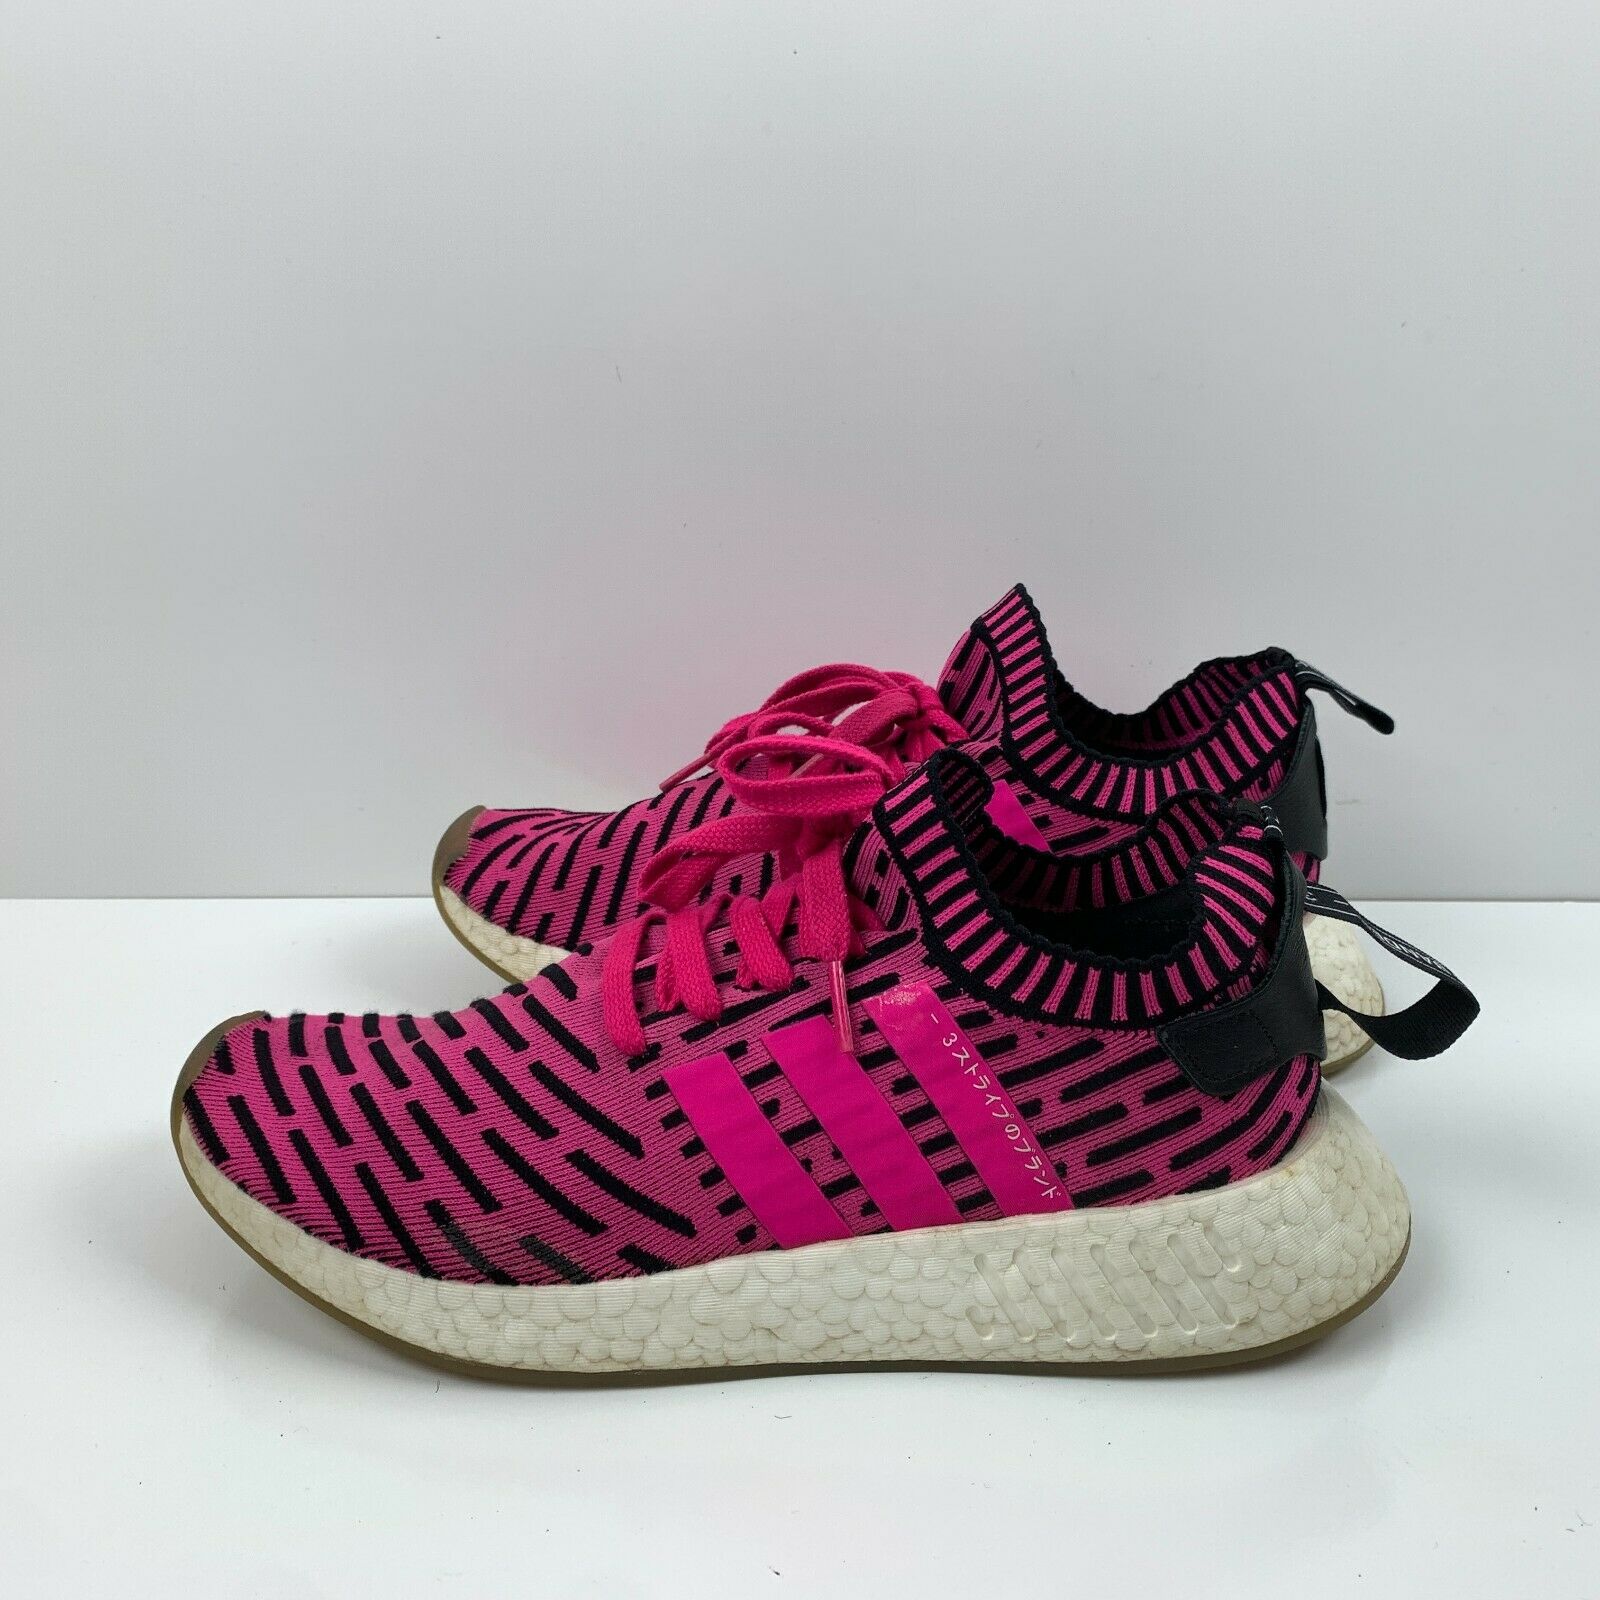 Adidas NMD R2 Primeknit Running Shoes Japanese Shock Pink BY9697 Mens Size 8.5